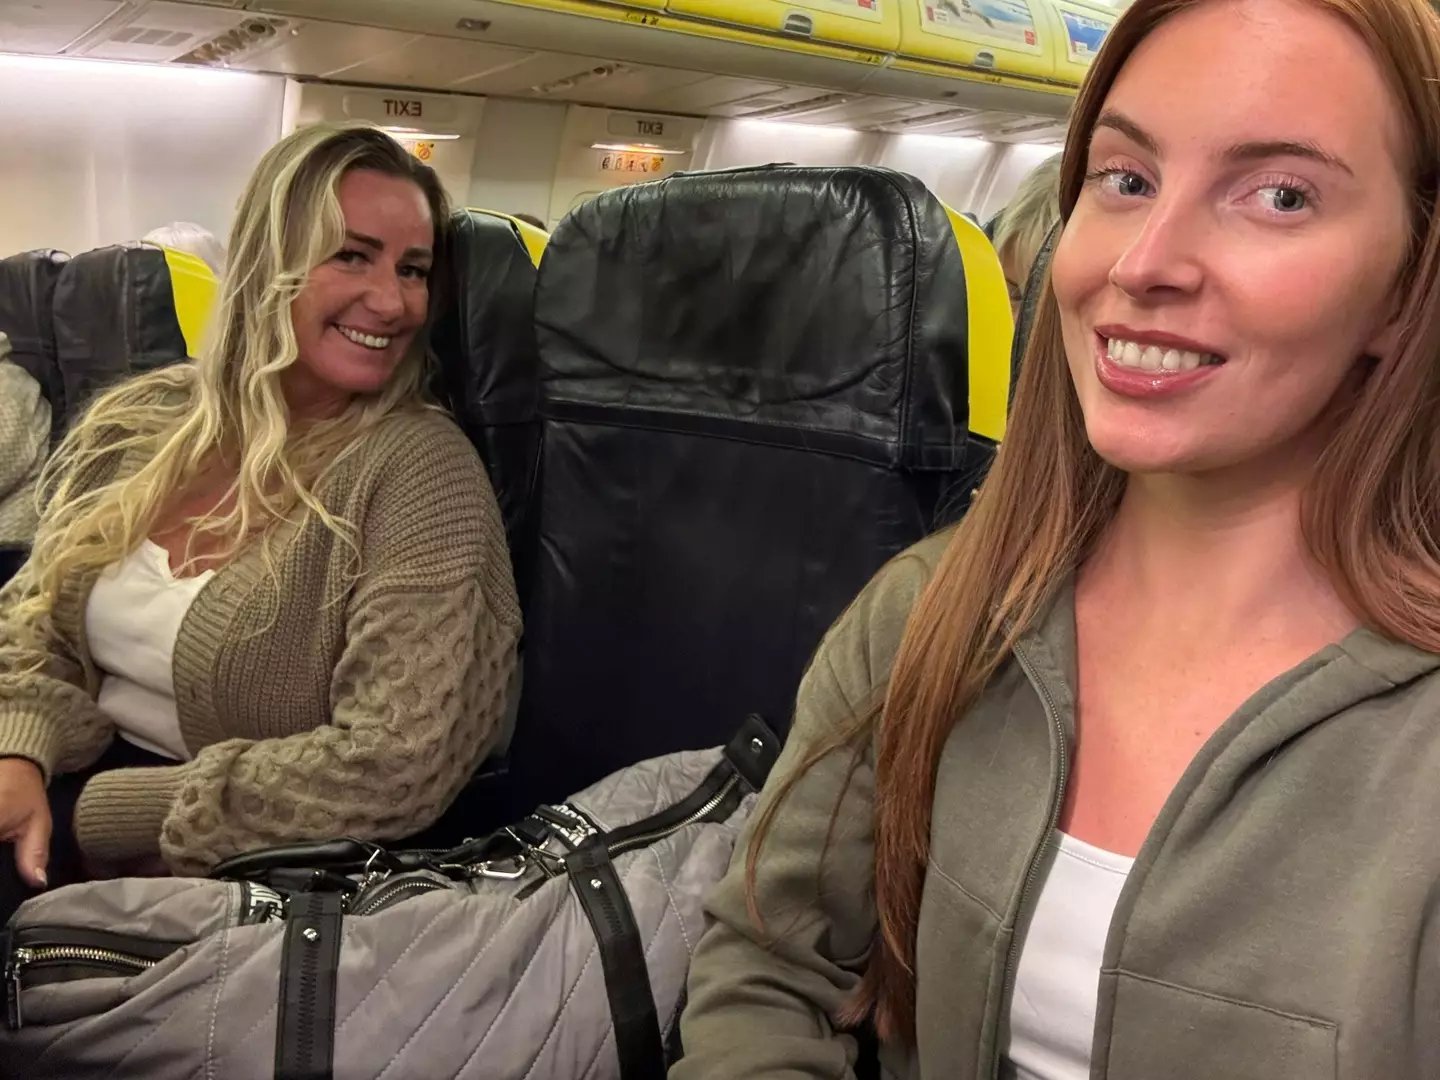 Nichola Stafford and Lily-Mae on their way to Lanzarote. Kenedy News and Media